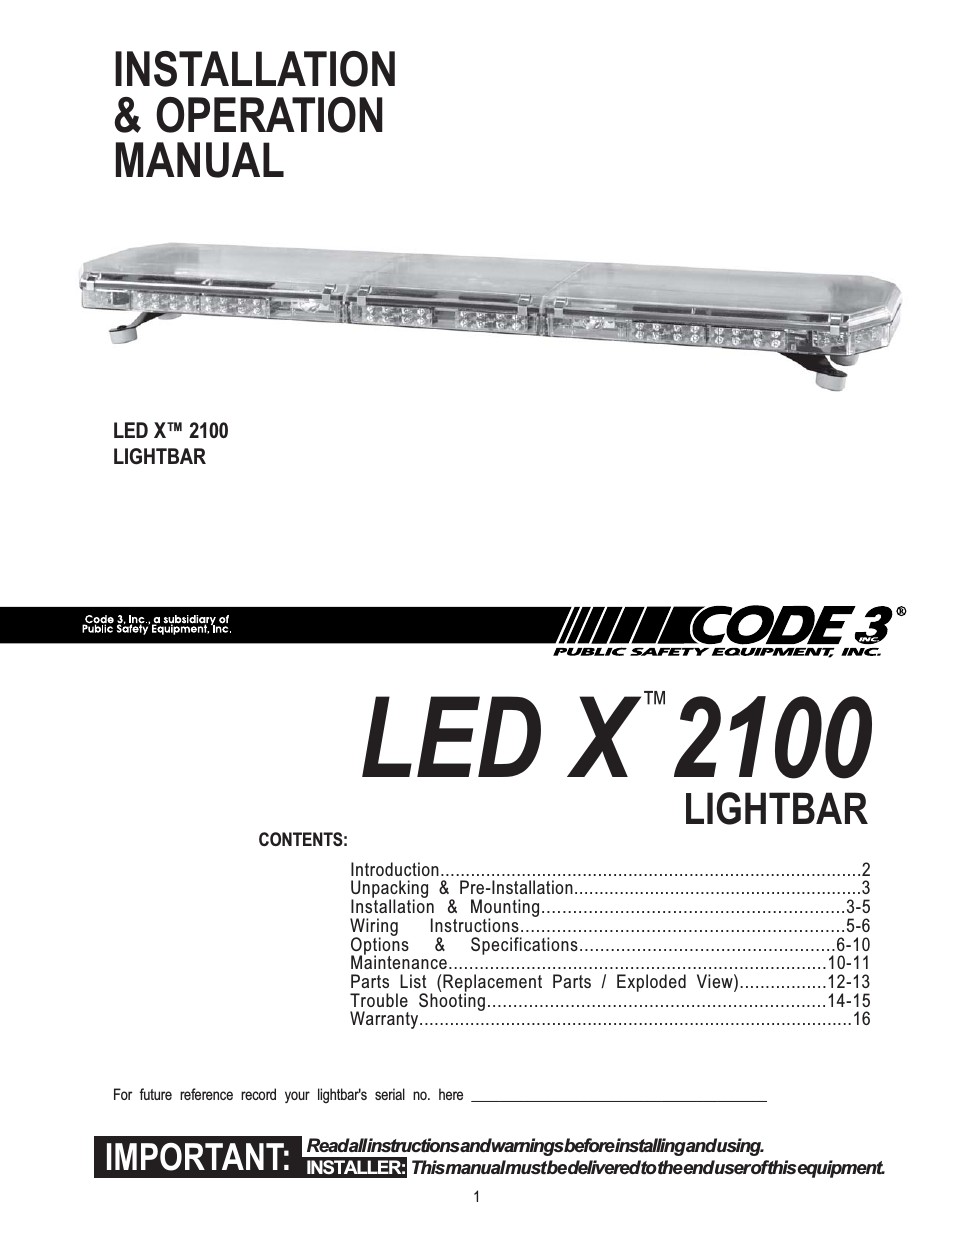 Best Light Bar Wire Diagram Contemporary The Electrical Code 3